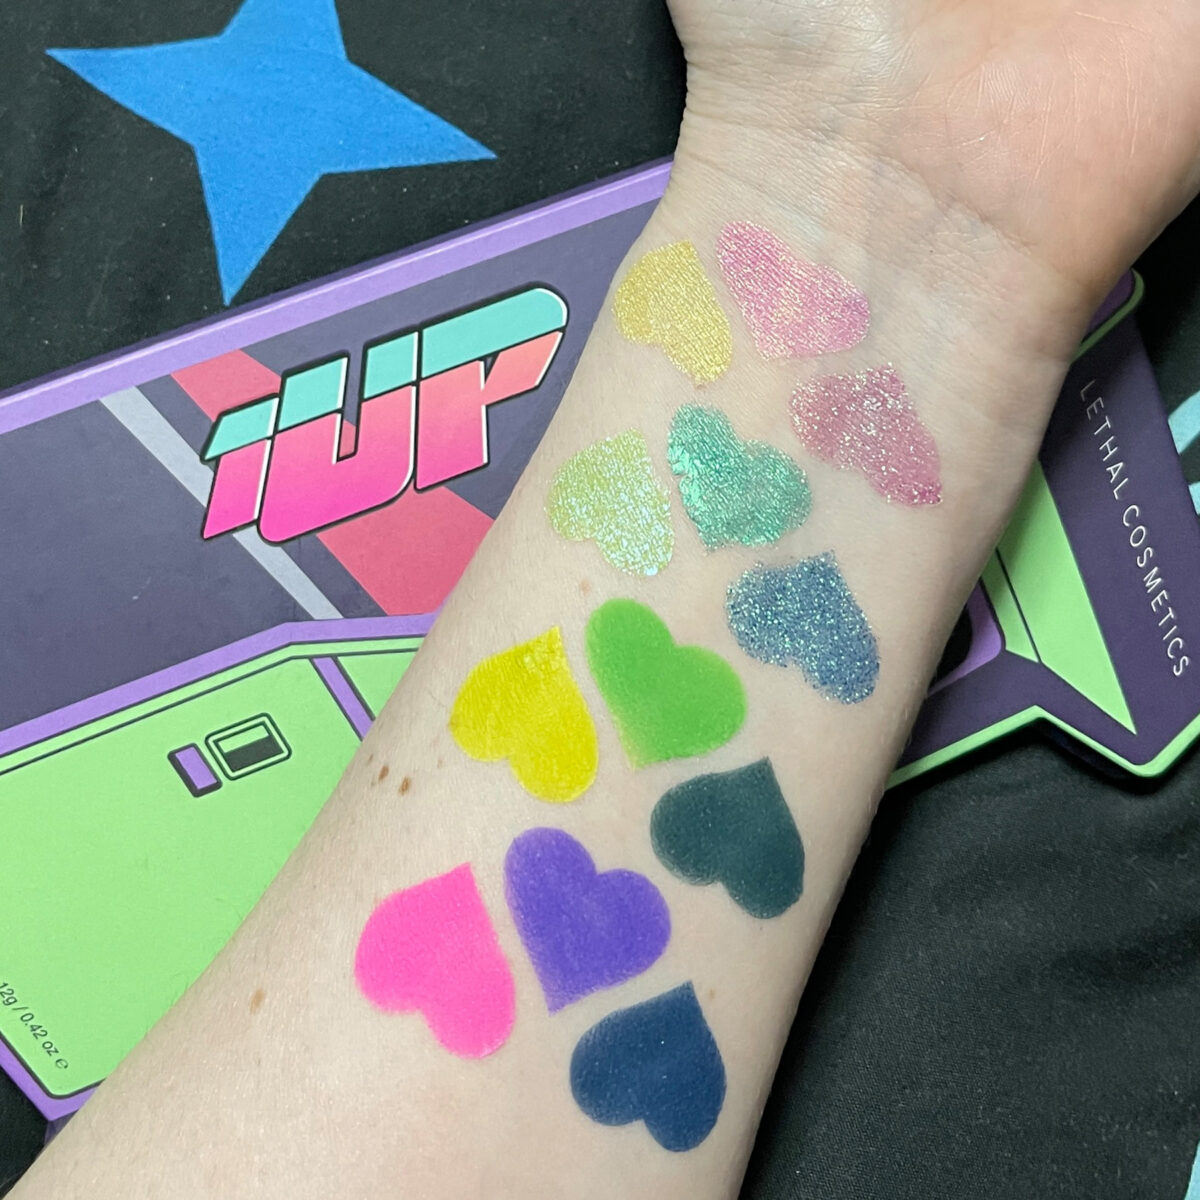 1UP Palette swatches on pale skin in artifical light